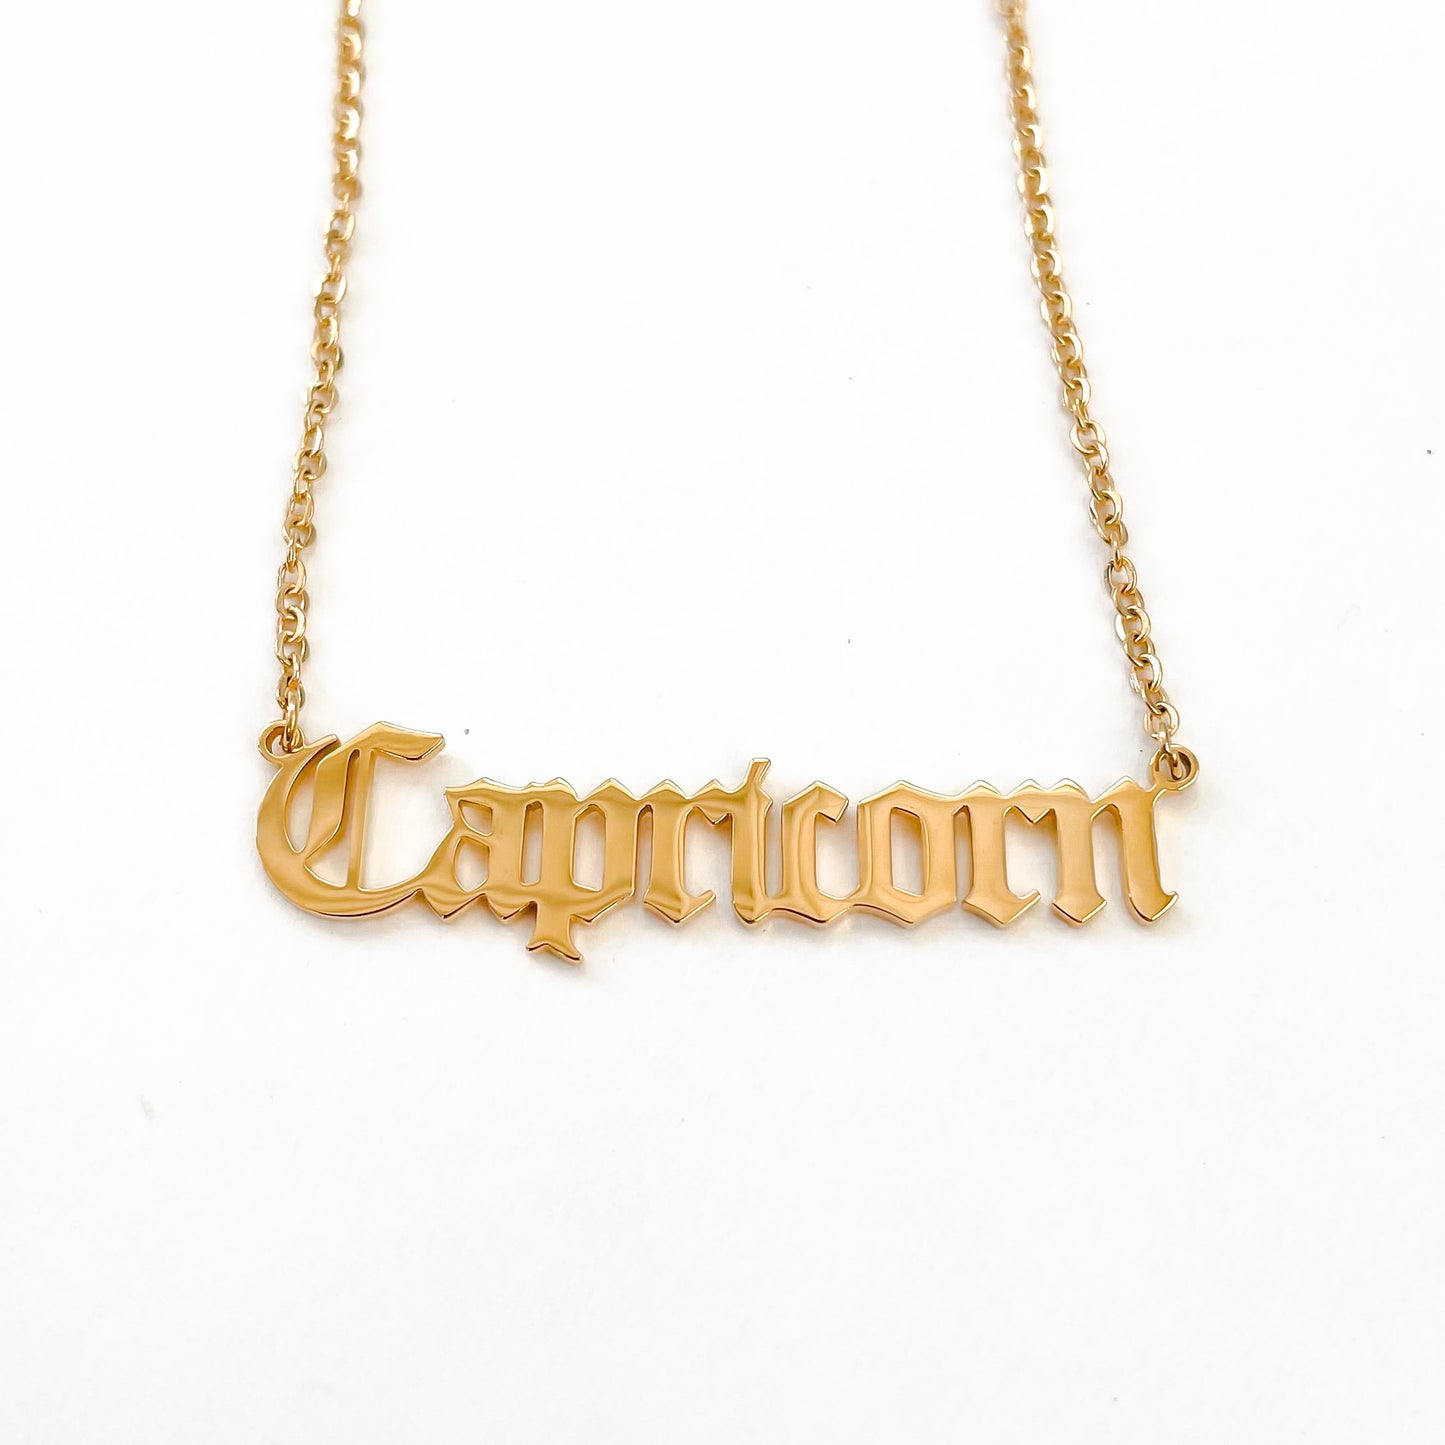 Capricorn Necklace in Gold